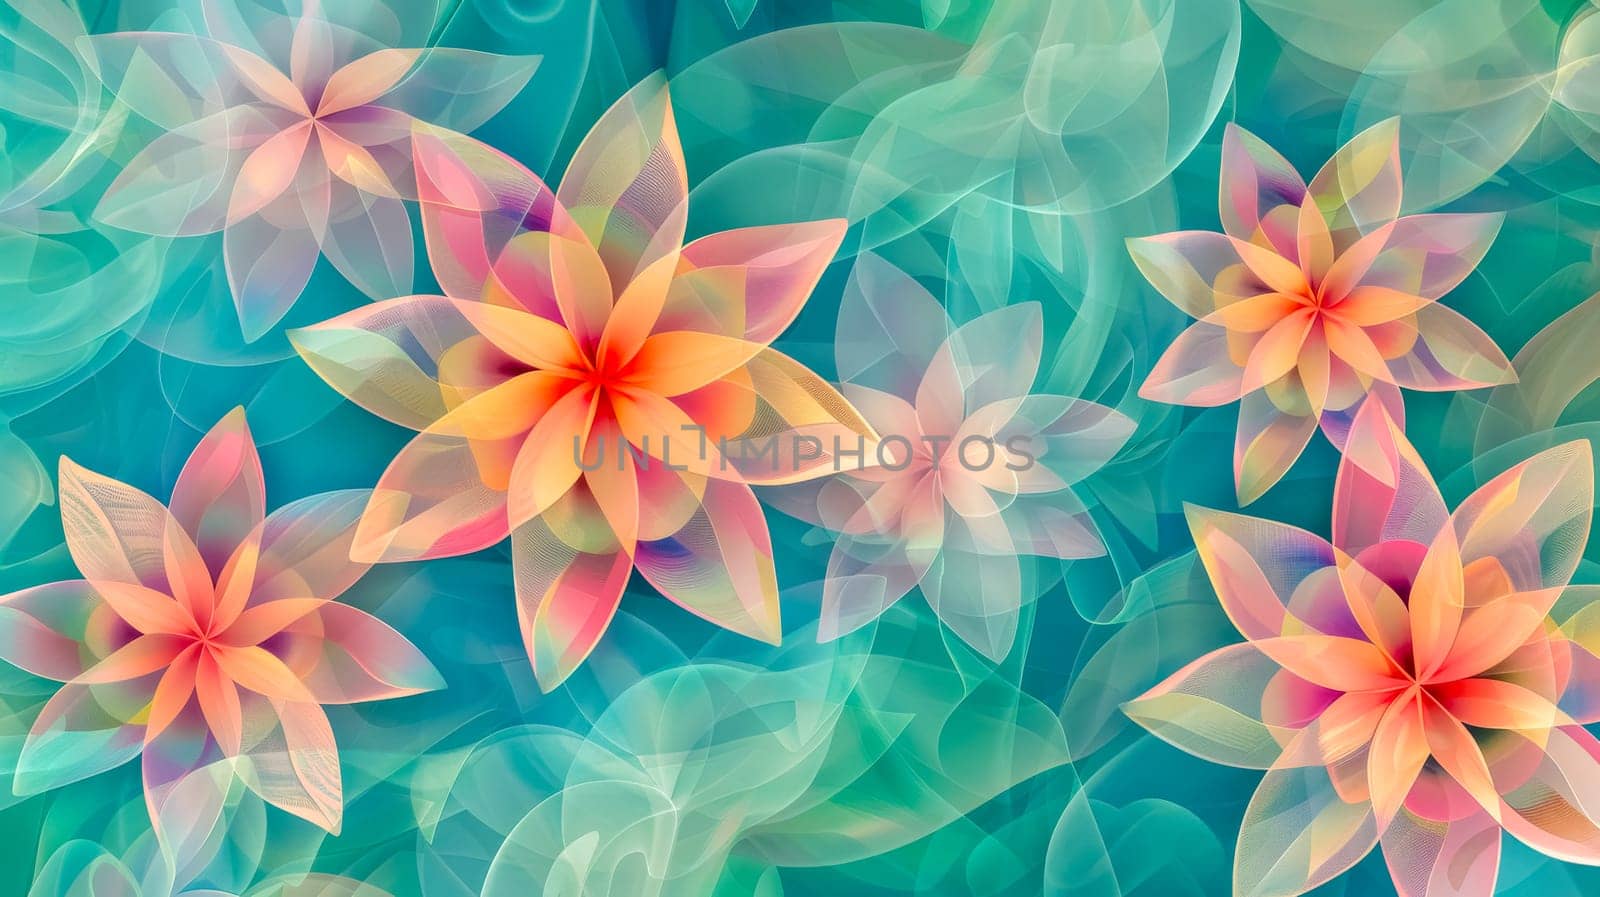 Vibrant digital floral pattern with gradient effects on a soothing aqua backdrop